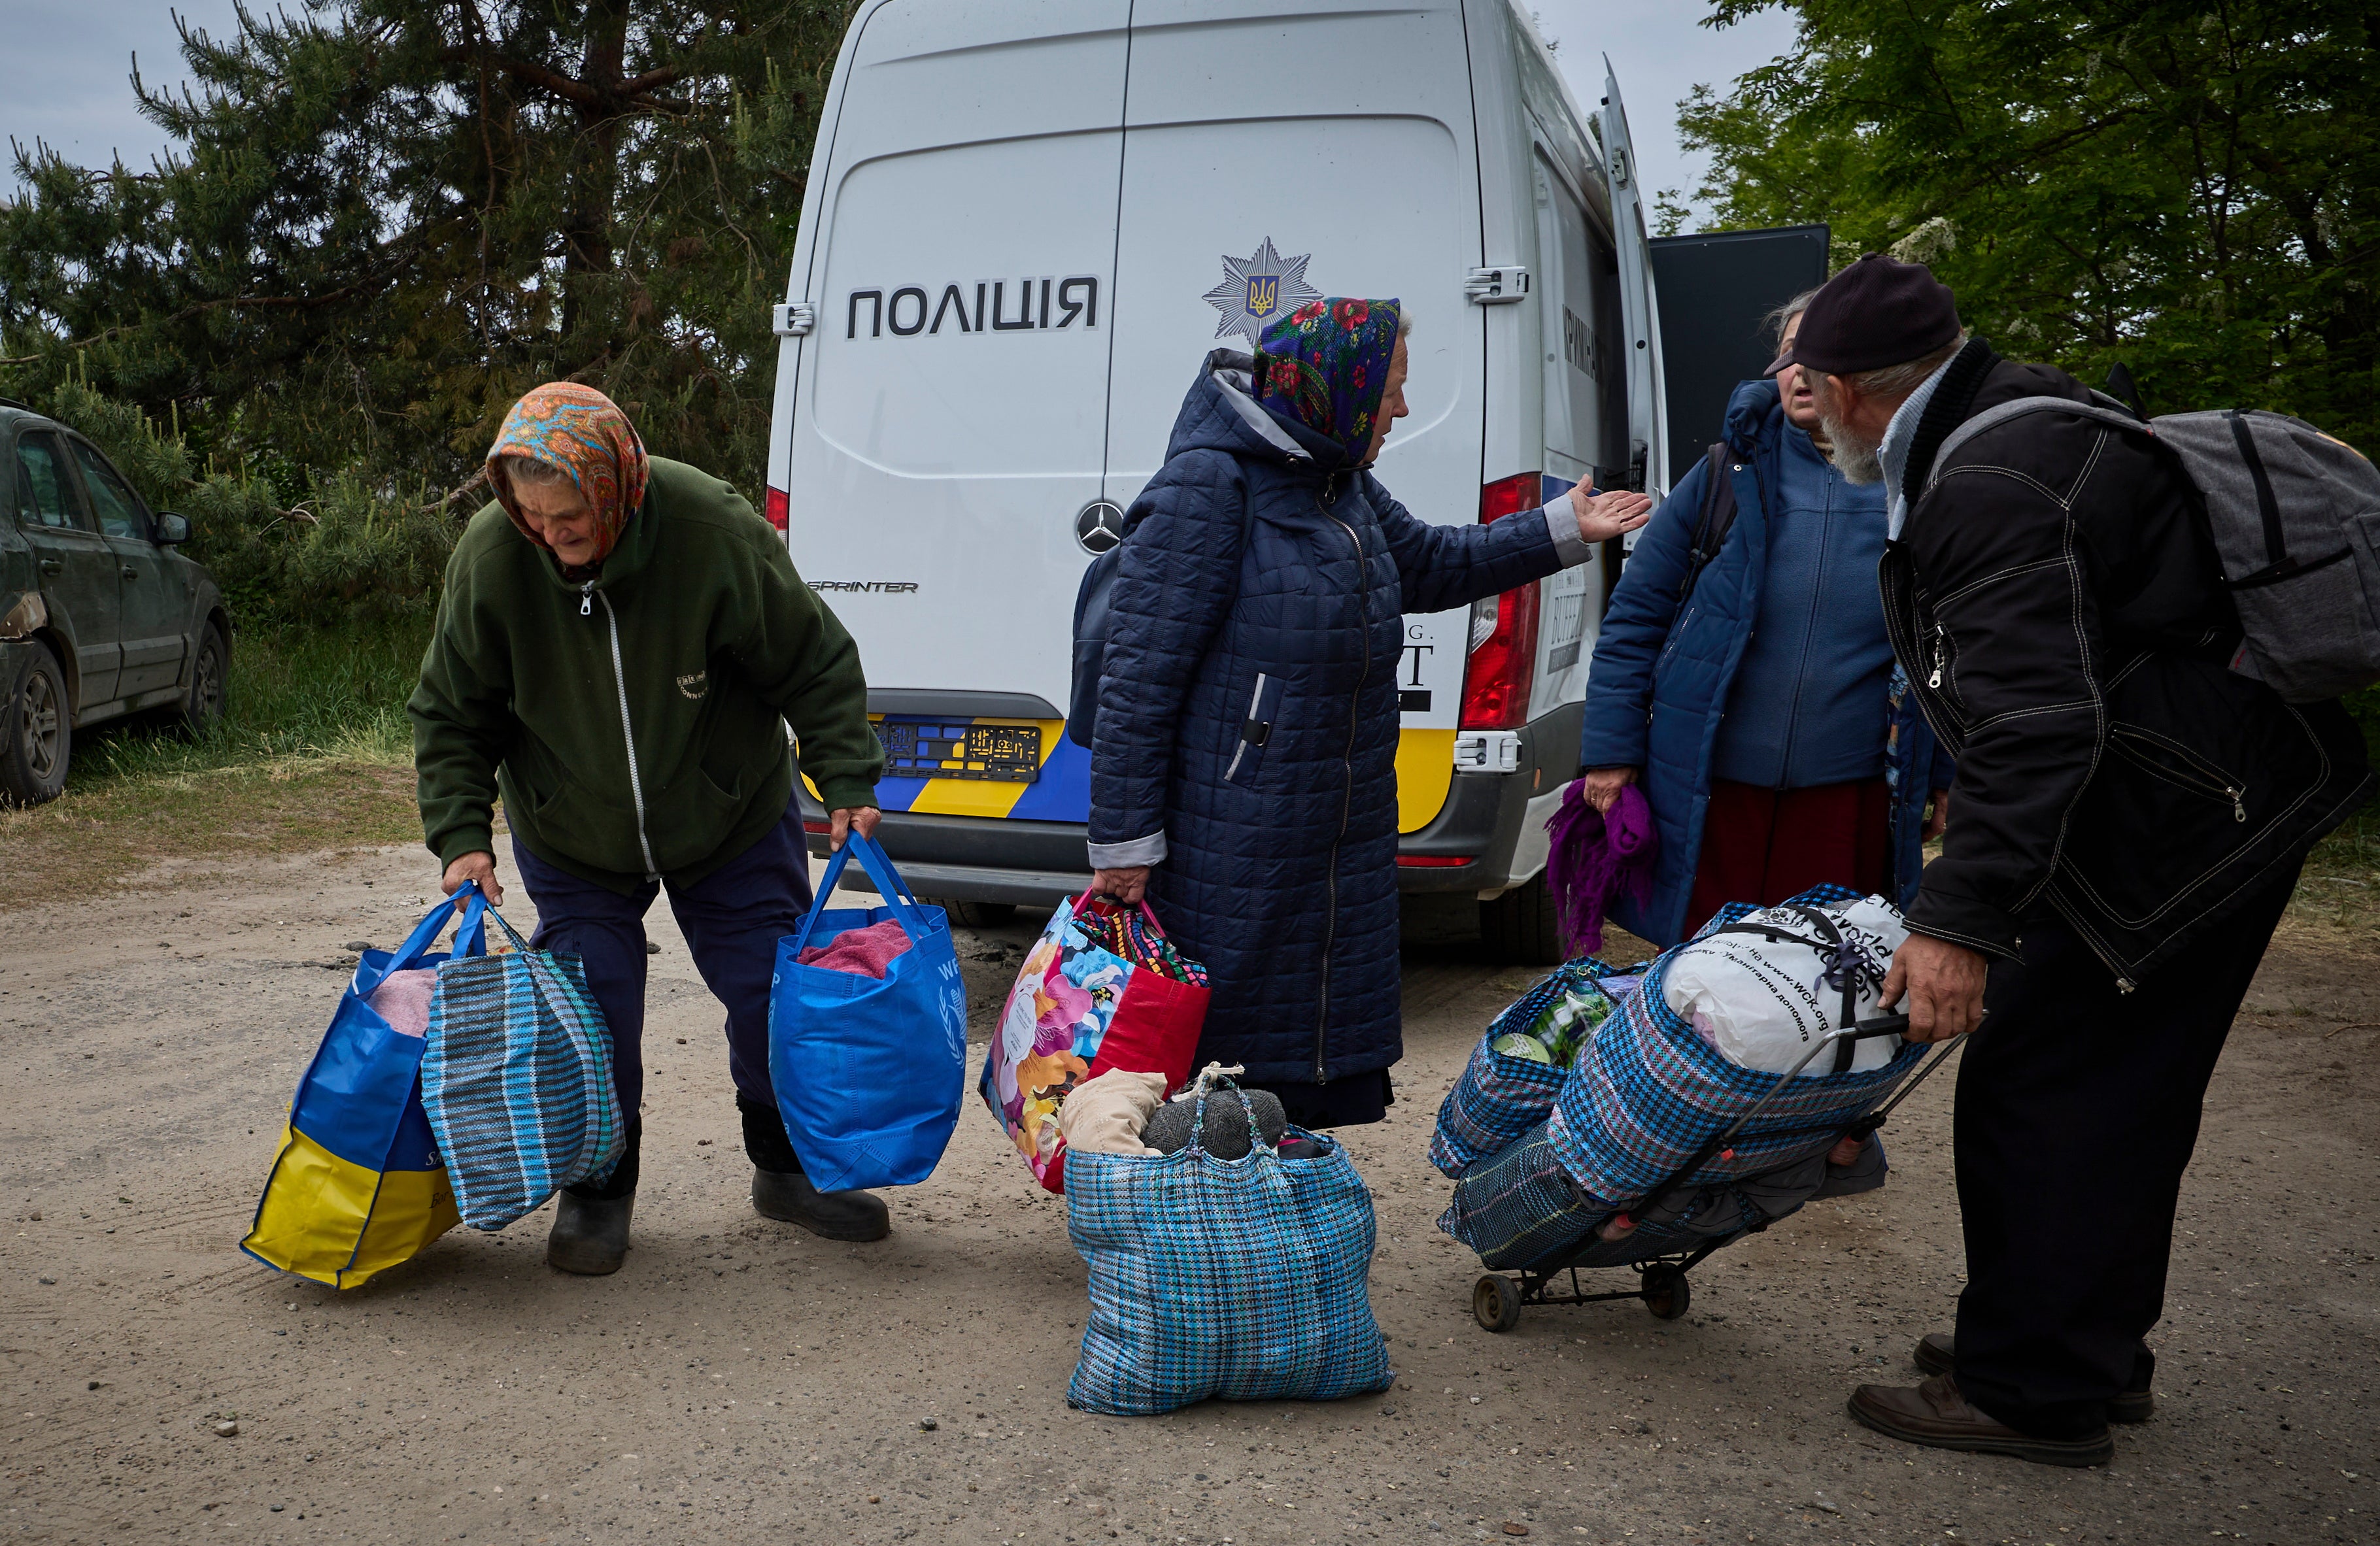 People gather at a mobile evacuation center for evacuees from different territories near the border with Russia, at an undisclosed location in Kharkiv's area